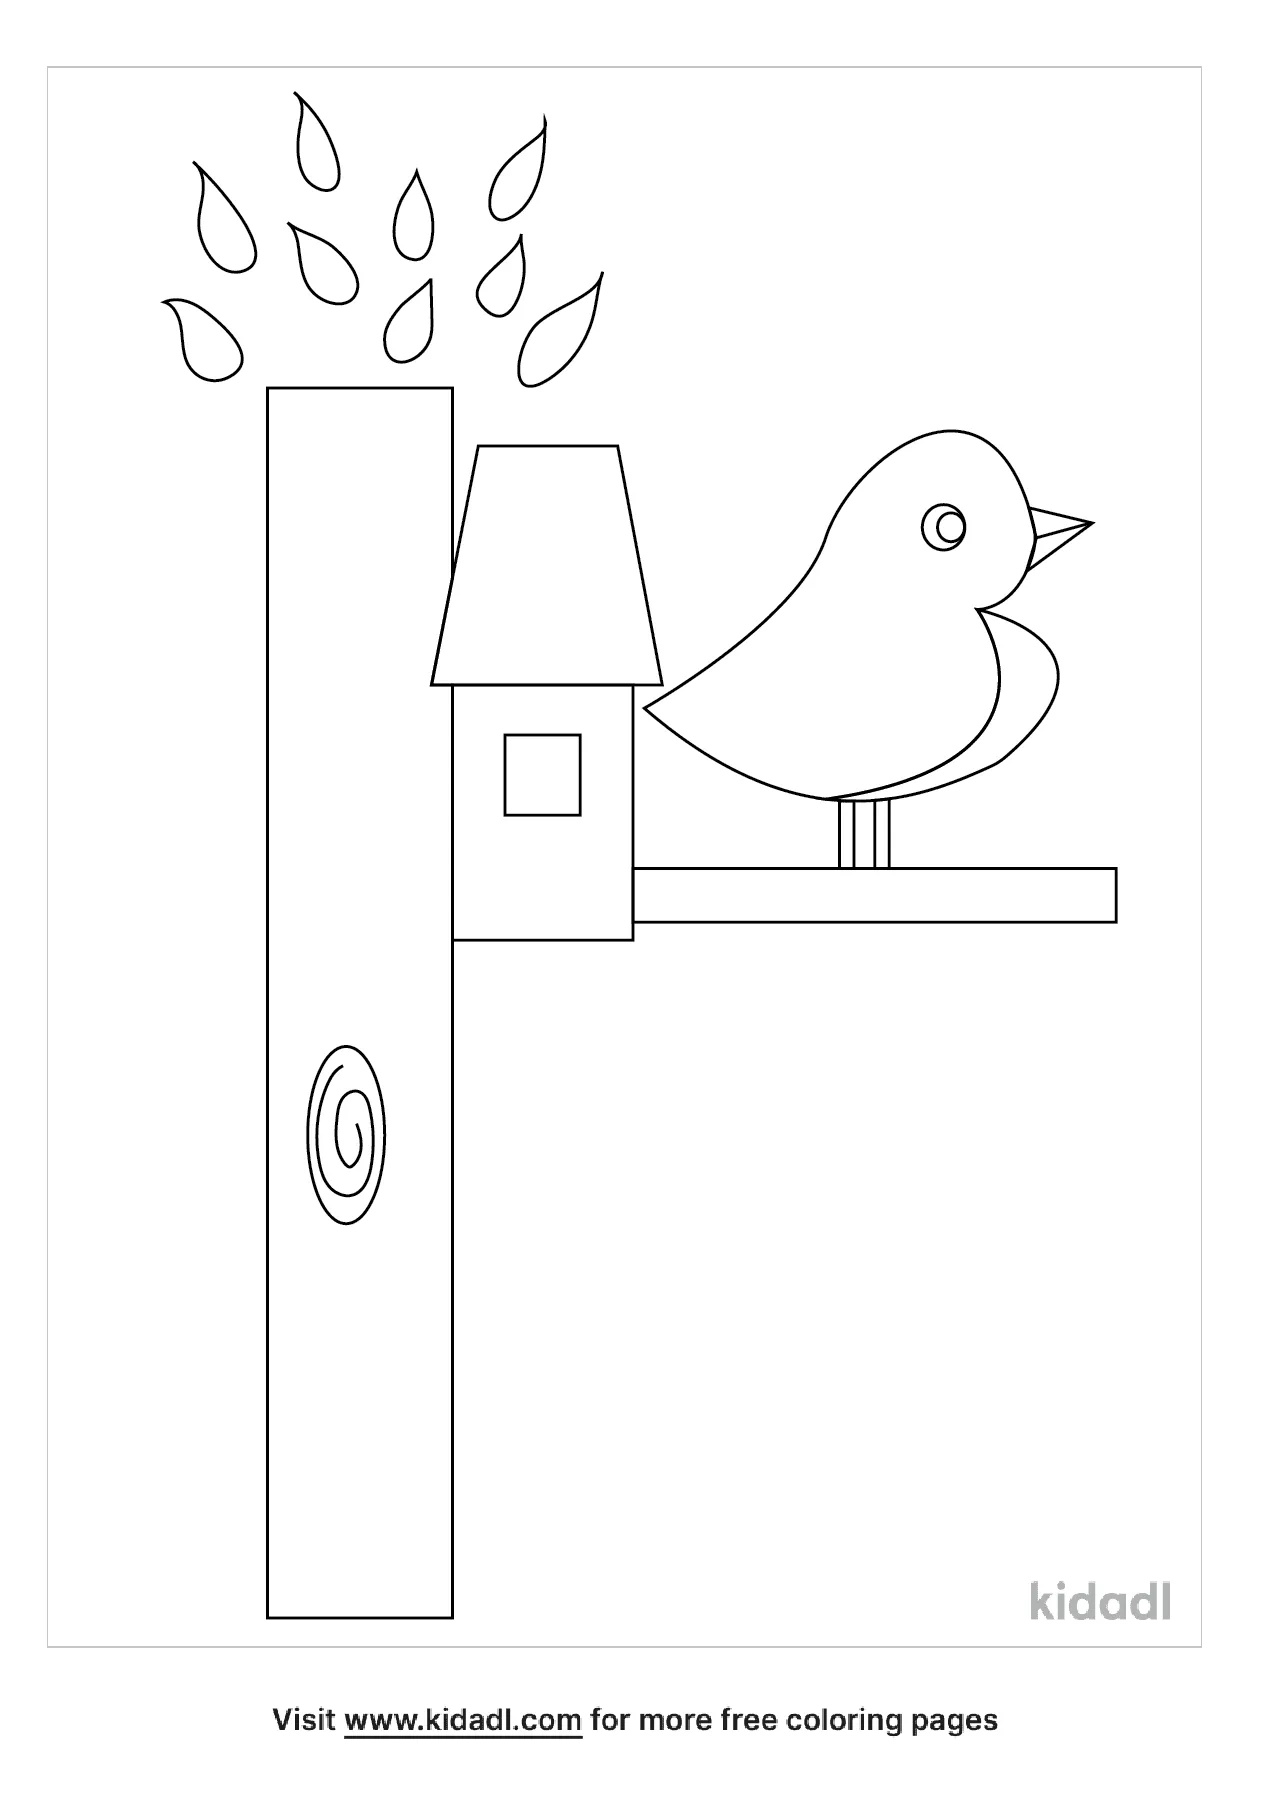 Bird And Bird House Coloring Page   Free Birds Coloring Page   Kidadl